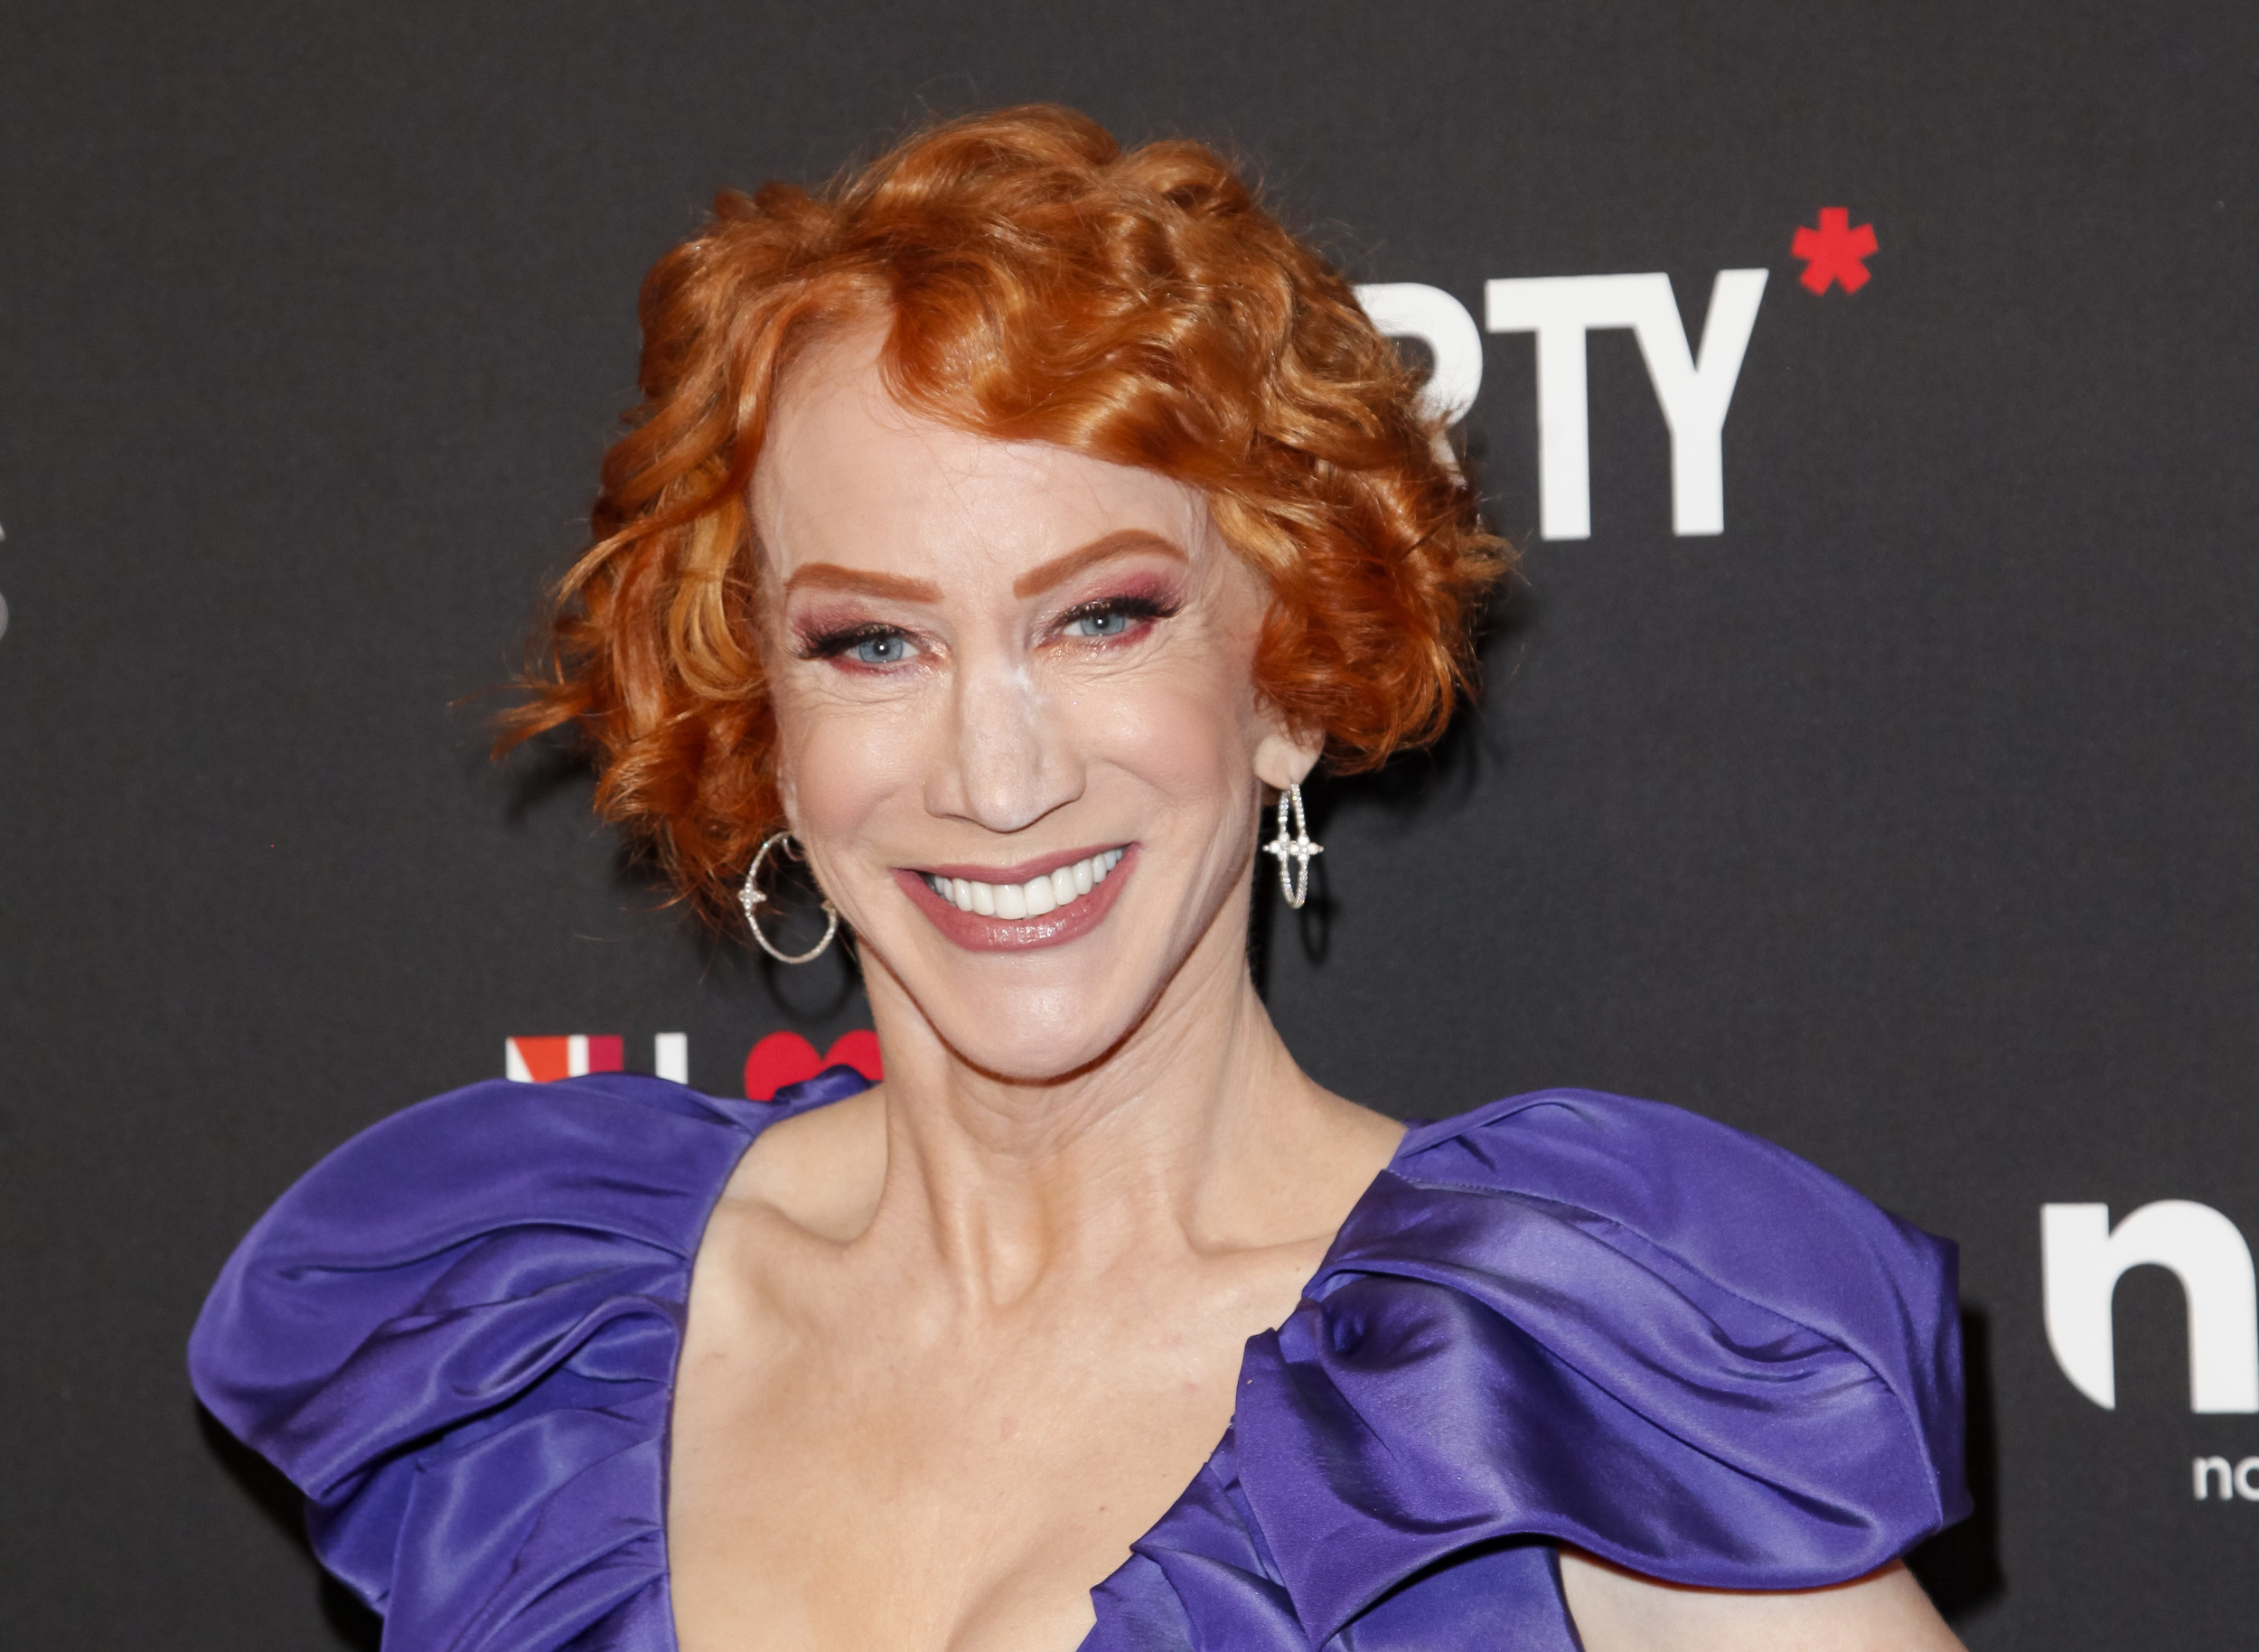 Kathy Griffin: CNN's New Year's Eve broadcast, December 31, 2009. 2500x1830 HD Wallpaper.